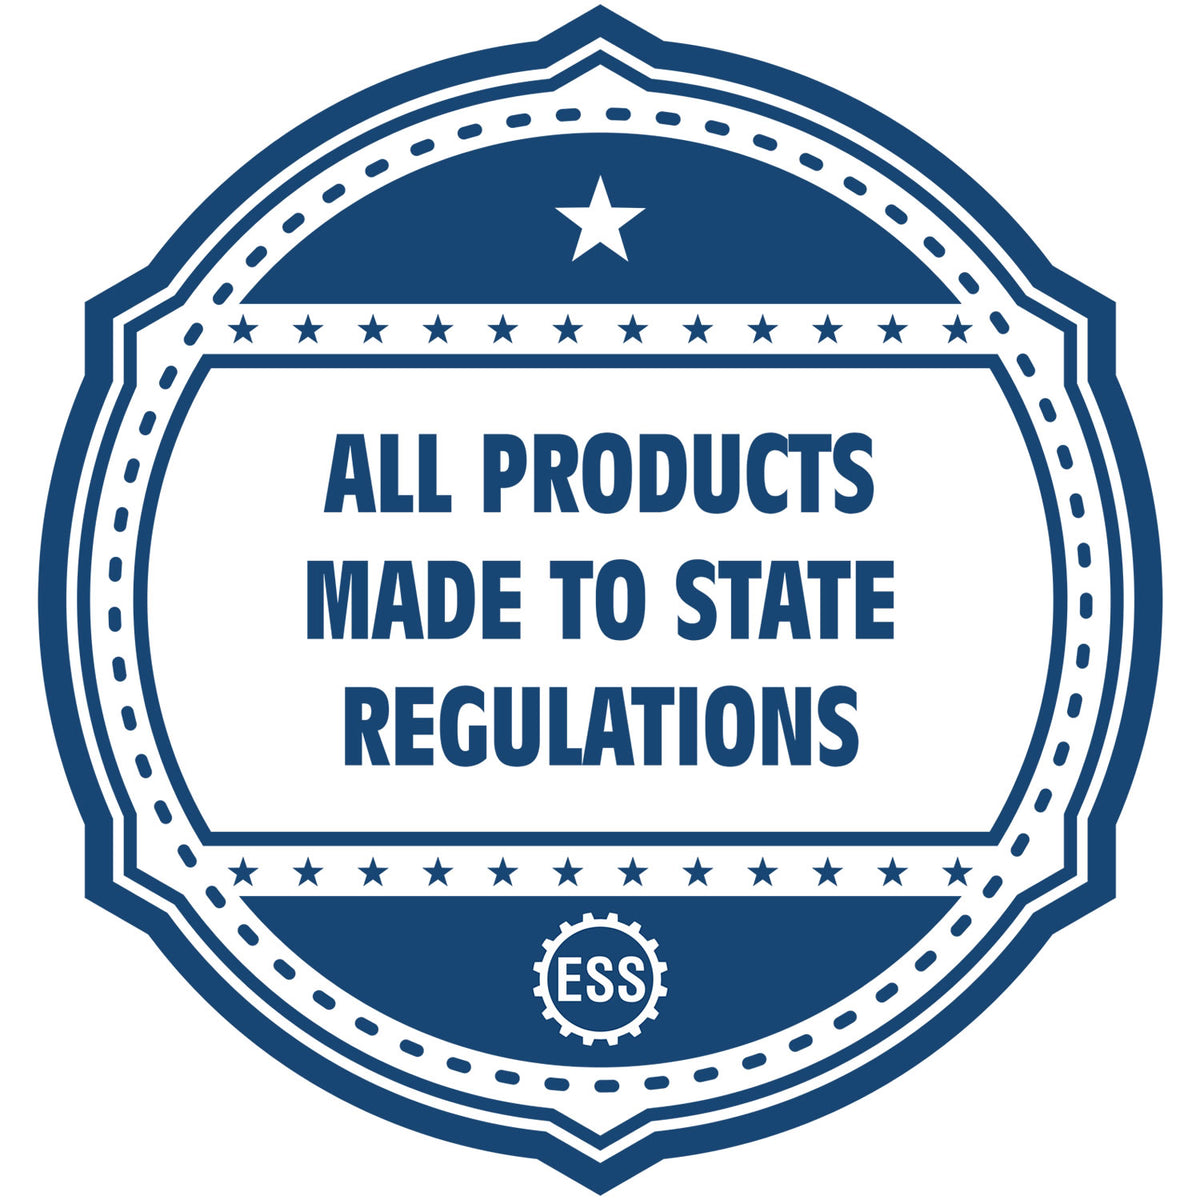 An icon or badge element for the Digital Pennsylvania Landscape Architect Stamp showing that this product is made in compliance with state regulations.